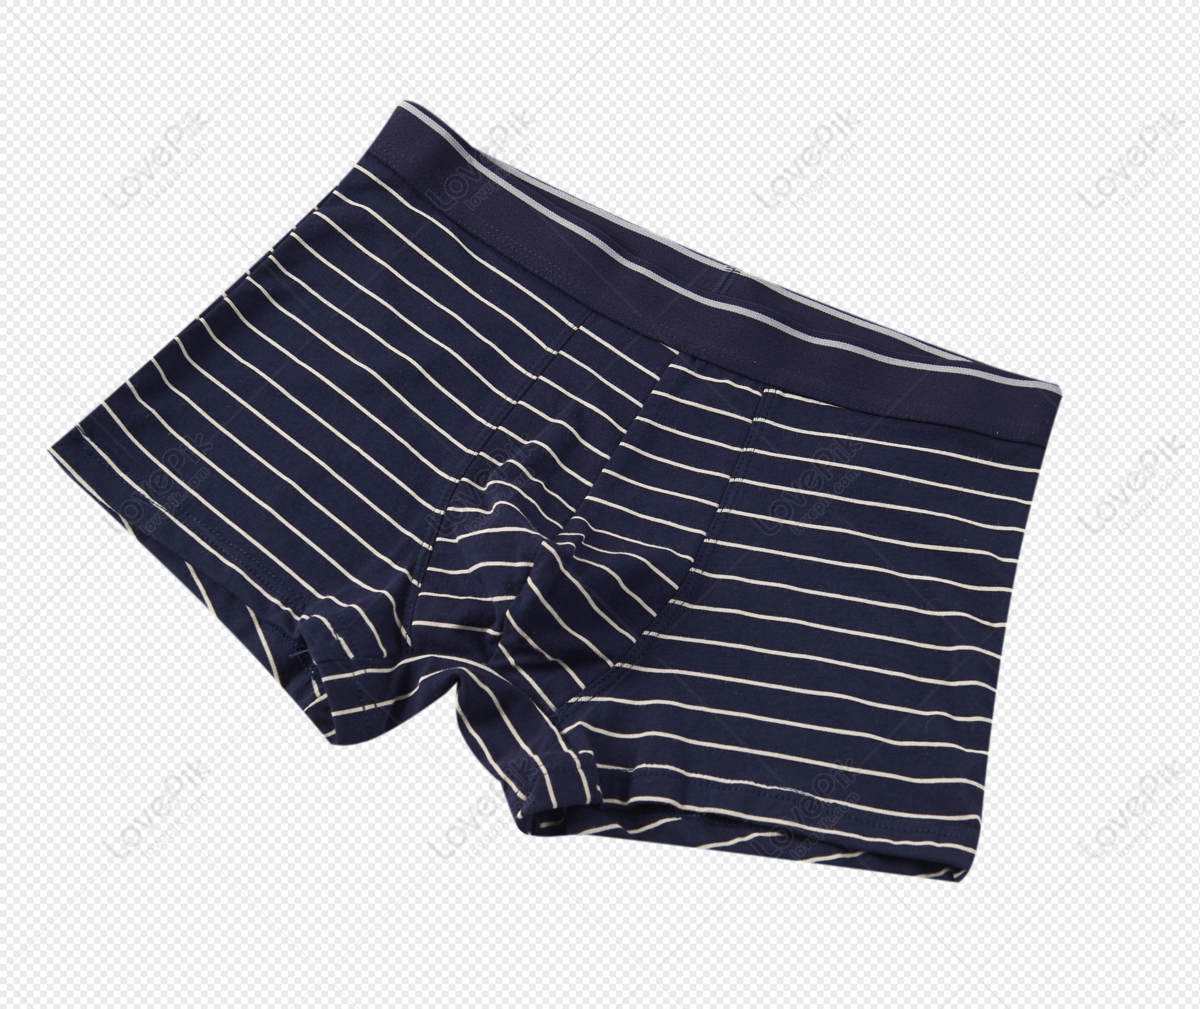 Underwear PNG Images With Transparent Background